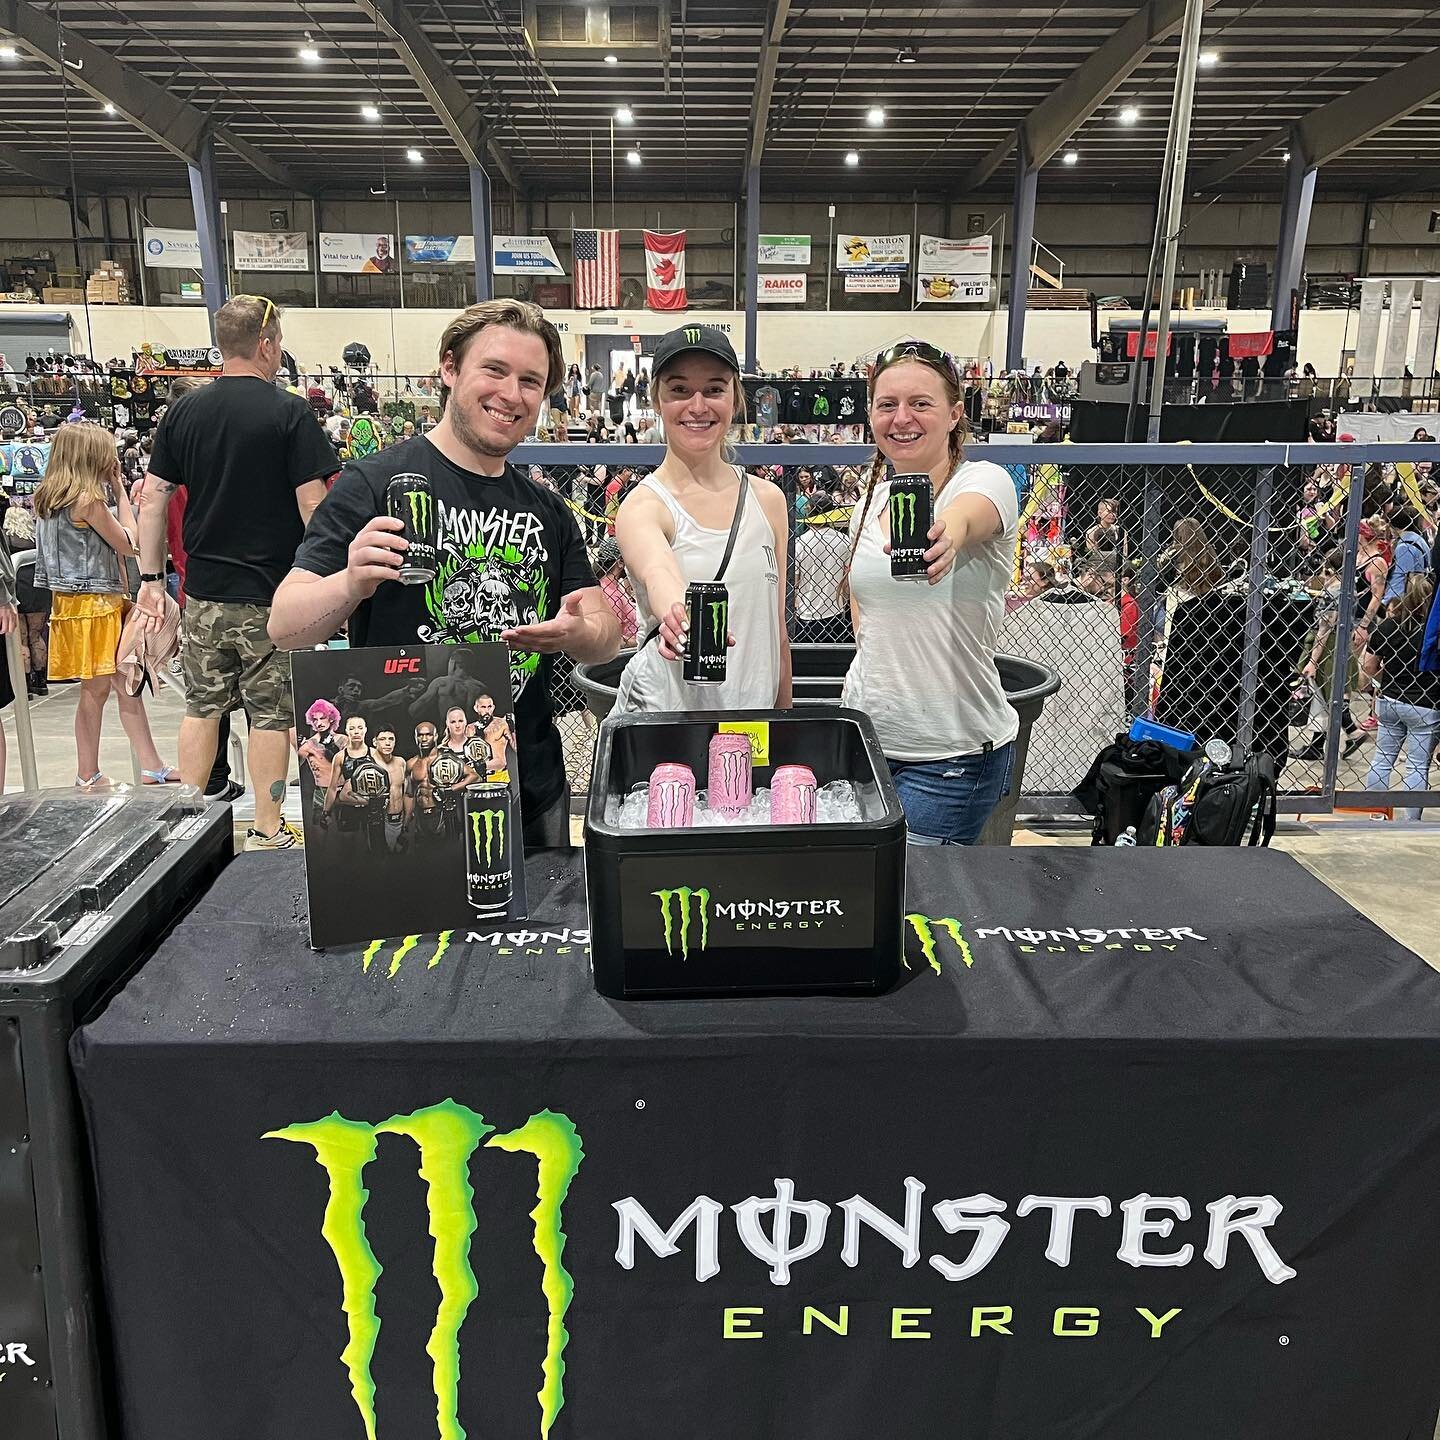 In the first of many thank you messages coming today, I just wanted to say a HUGE HUGE thank you to the team from @monsterenergy for coming out to @akronprfm and being part of the show and for the massive contribution to event, both in way of Monster